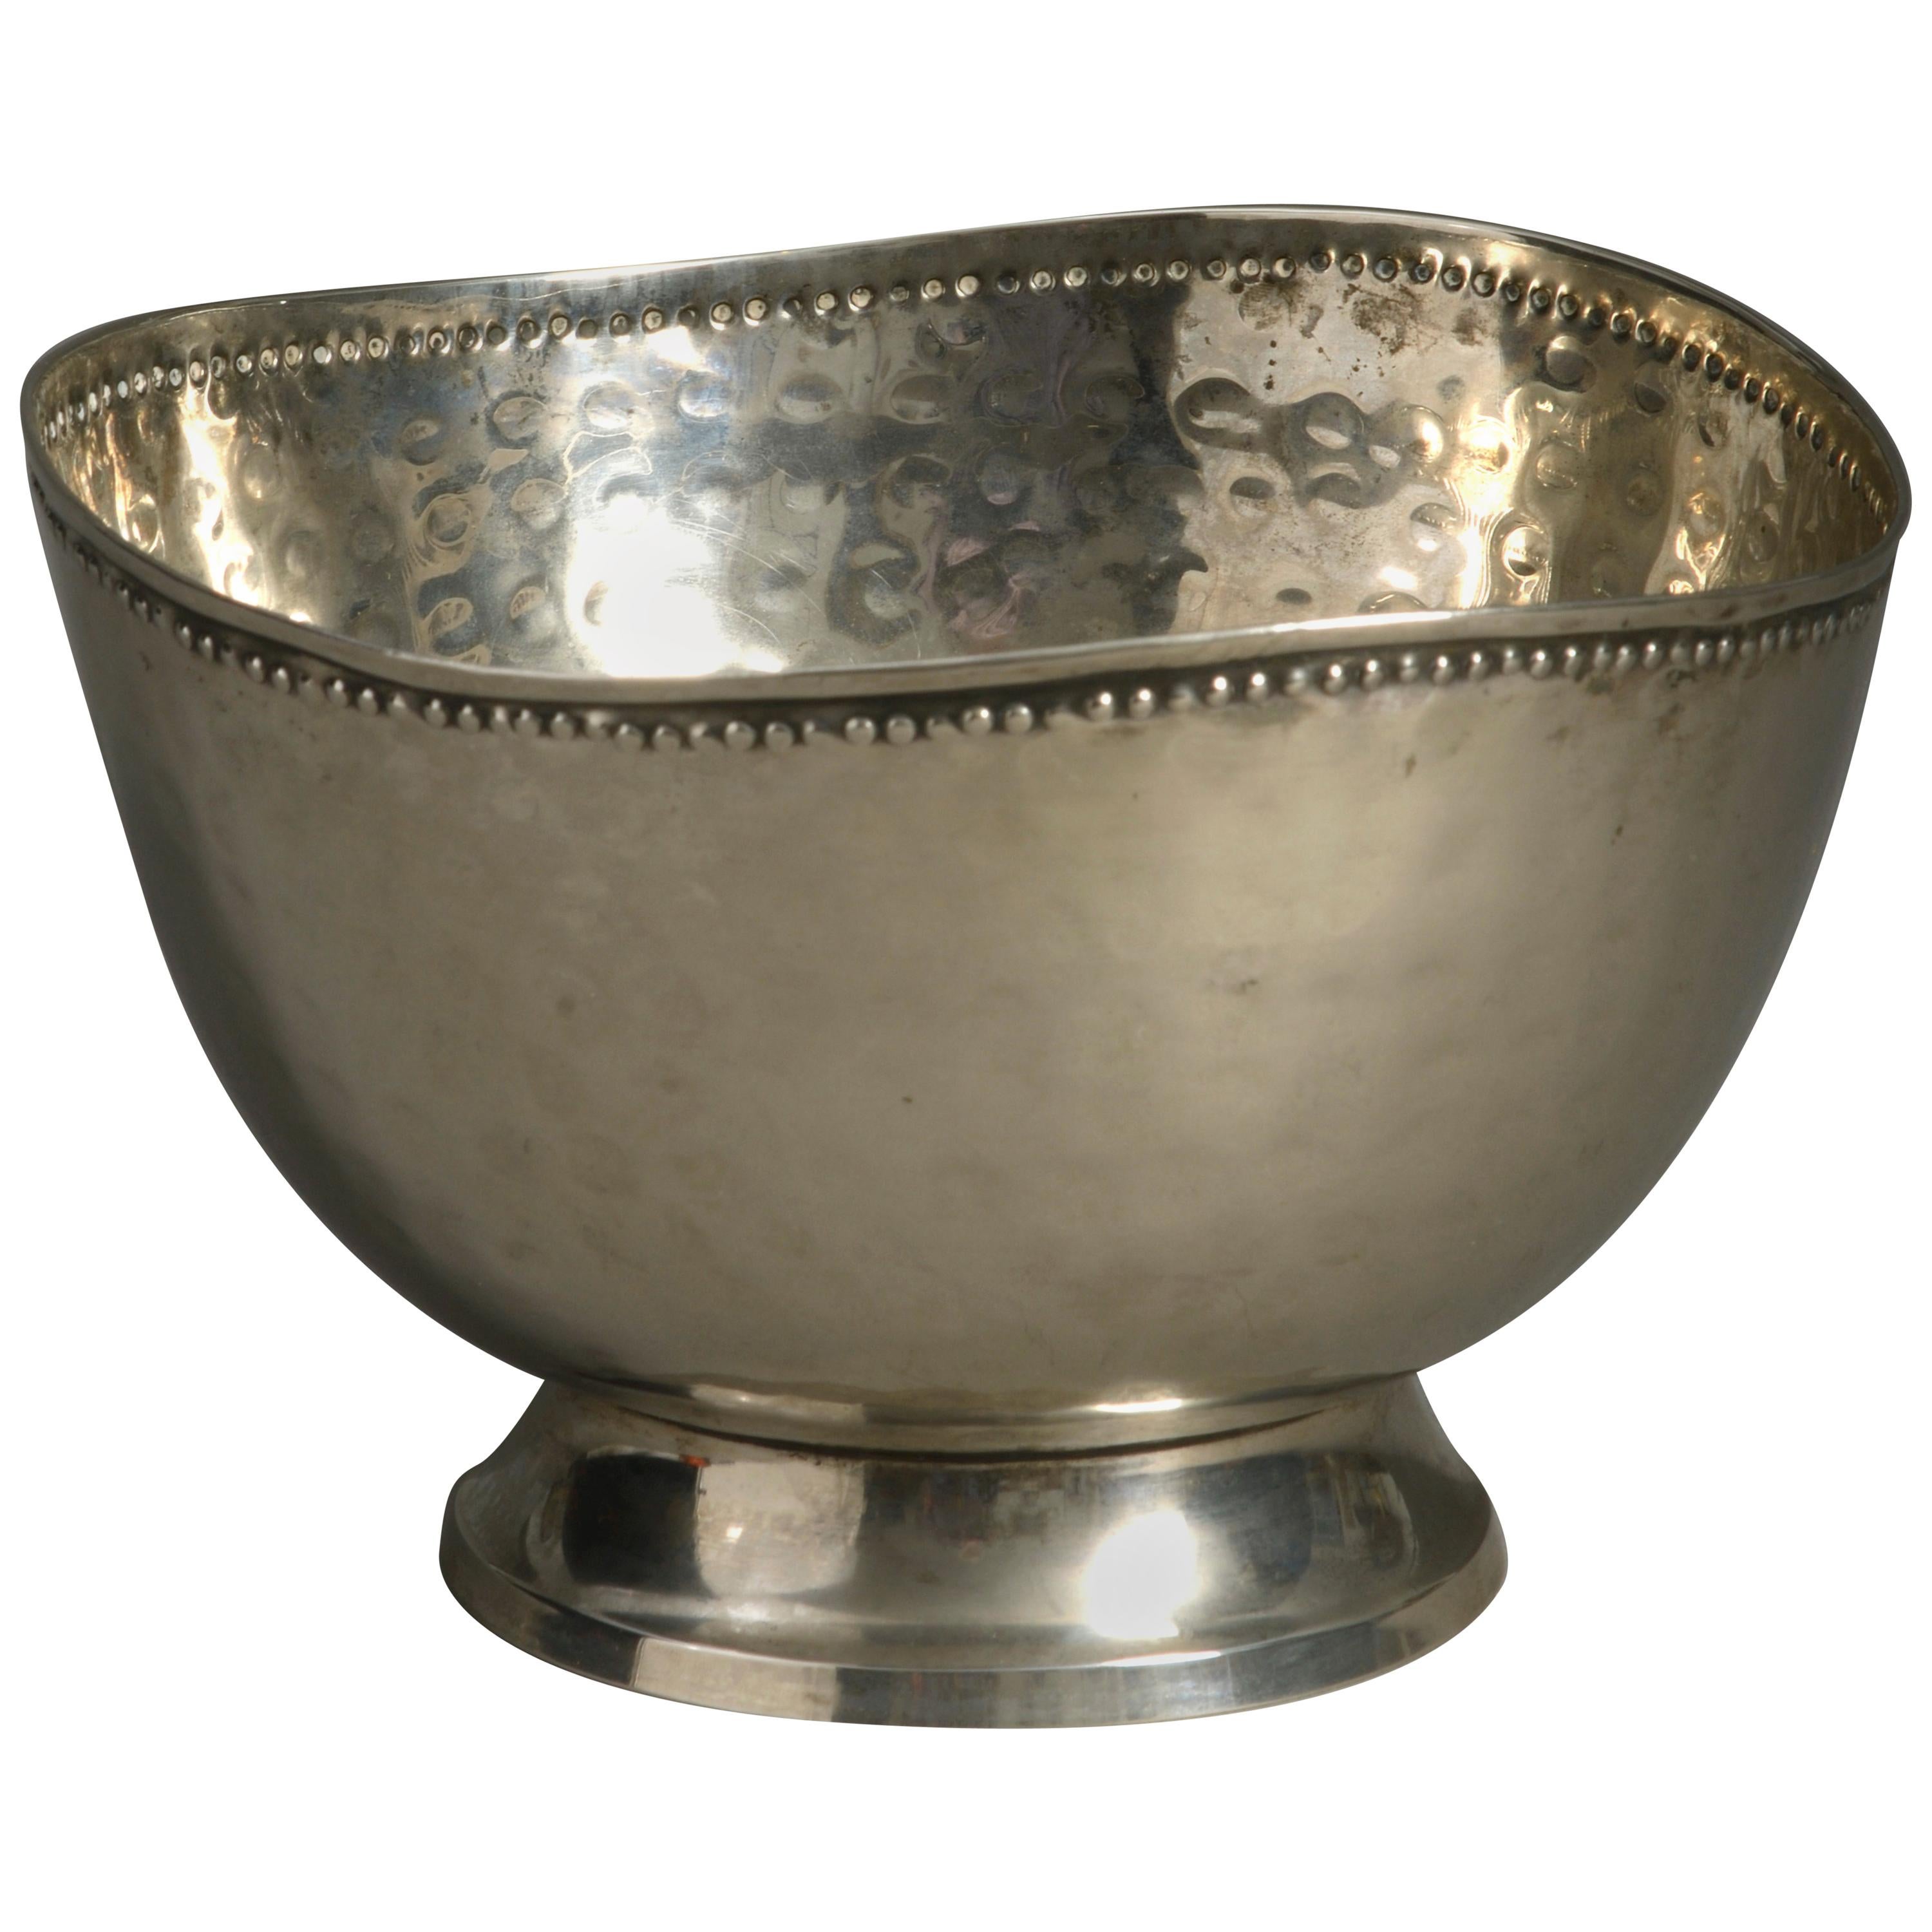 Midcentury Hammered Silvered Bowl